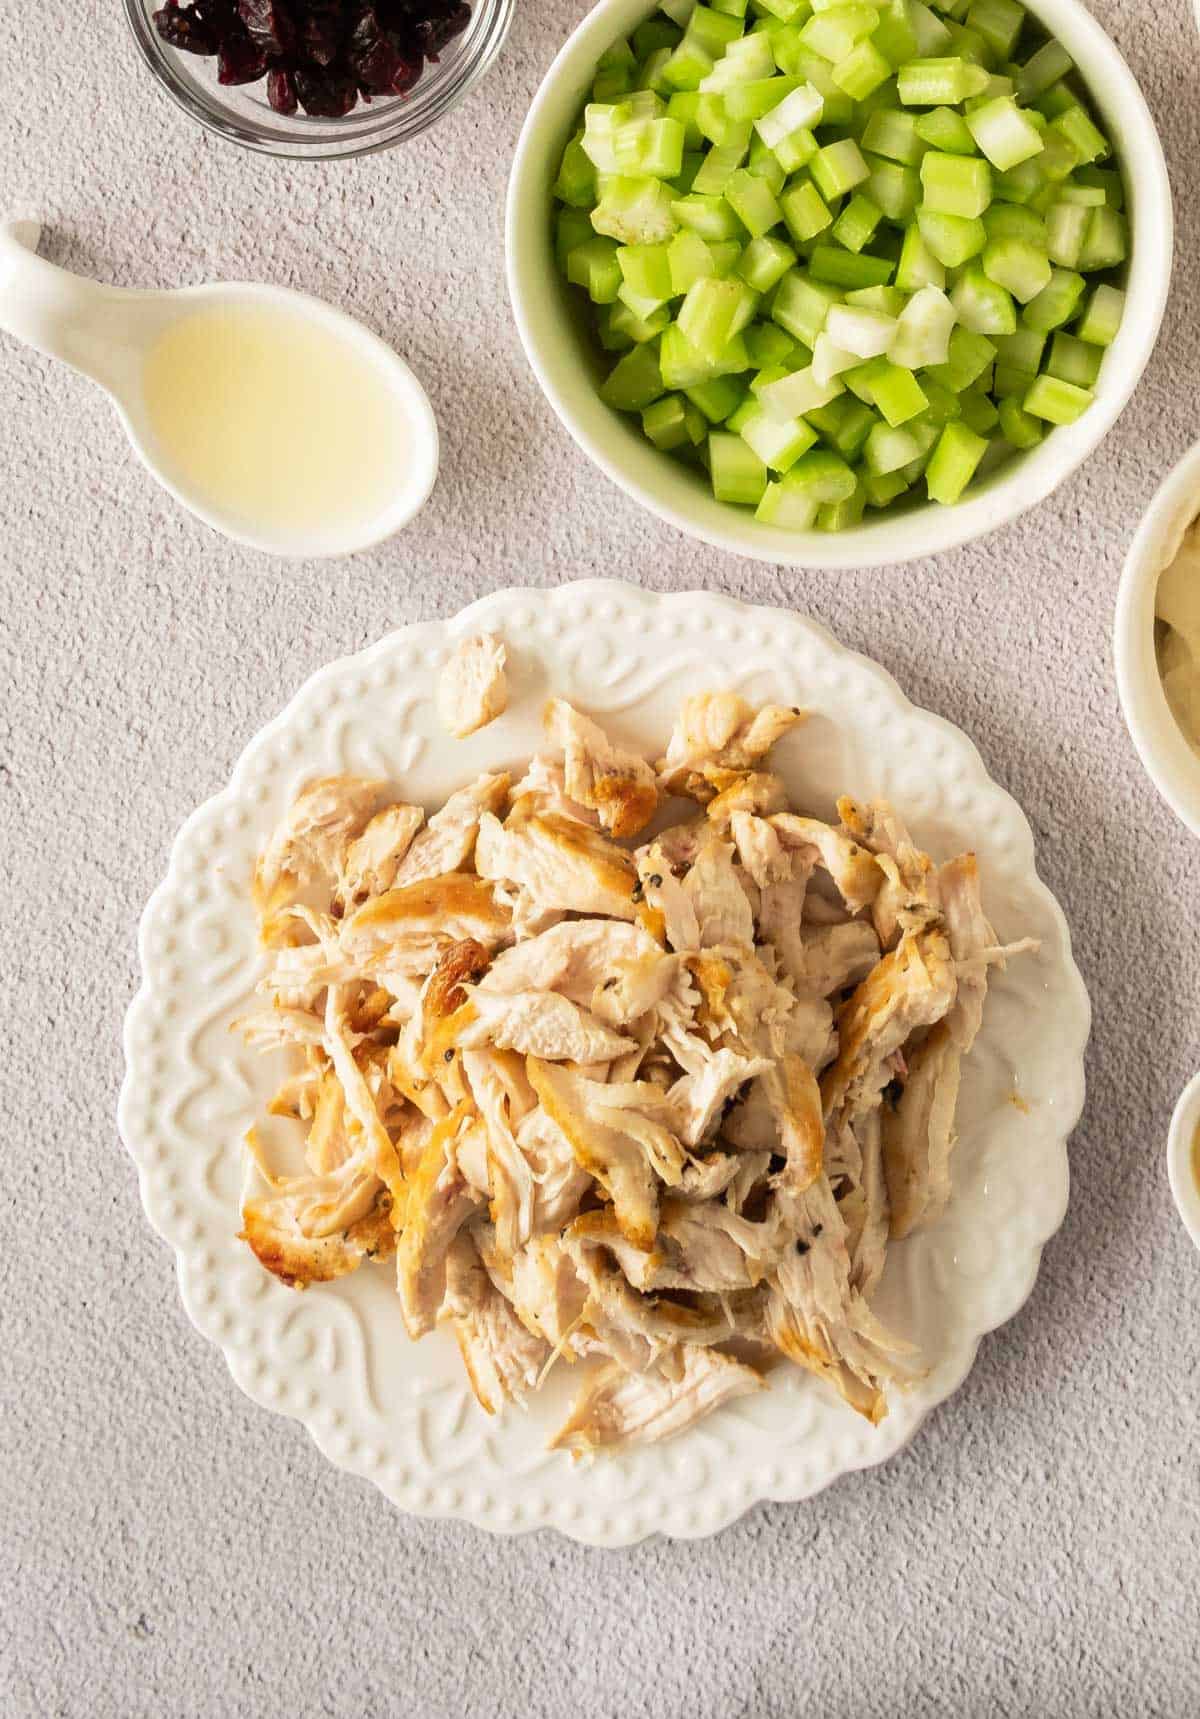 Shredded chicken with cranberries and celery on a white plate.